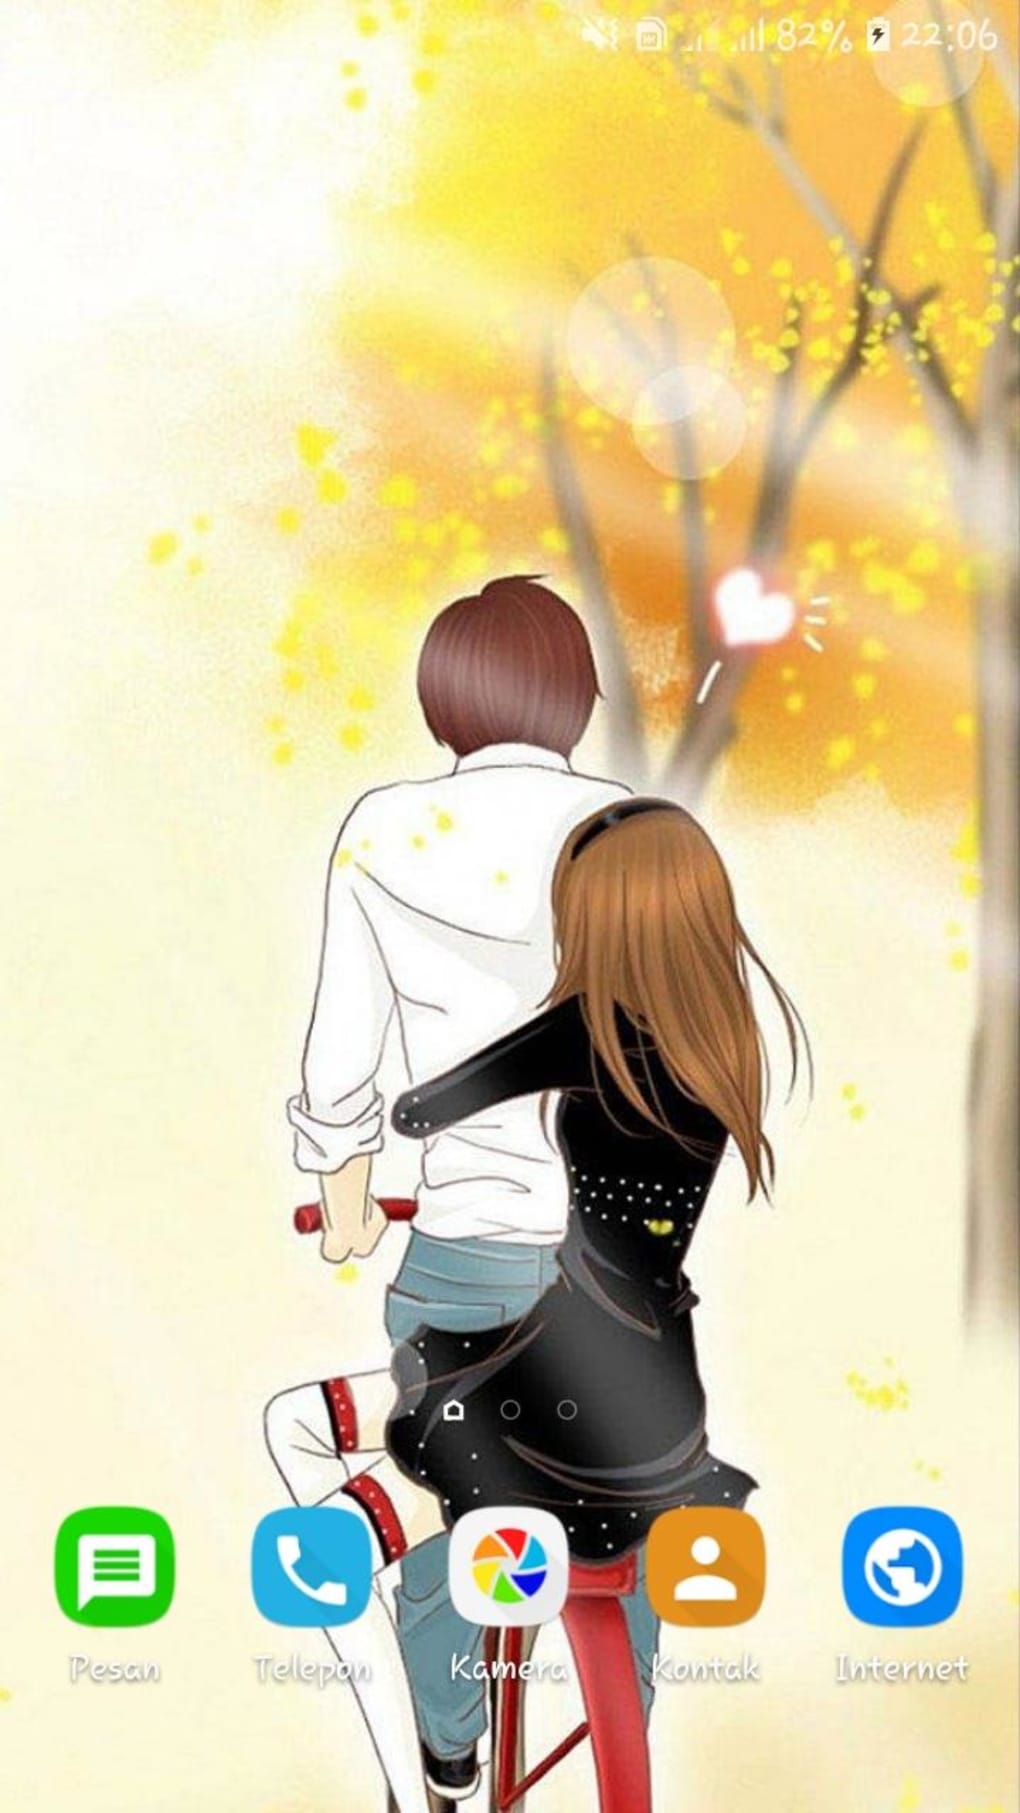 1900 Romantic Anime Couples Stock Photos Pictures  RoyaltyFree Images   iStock